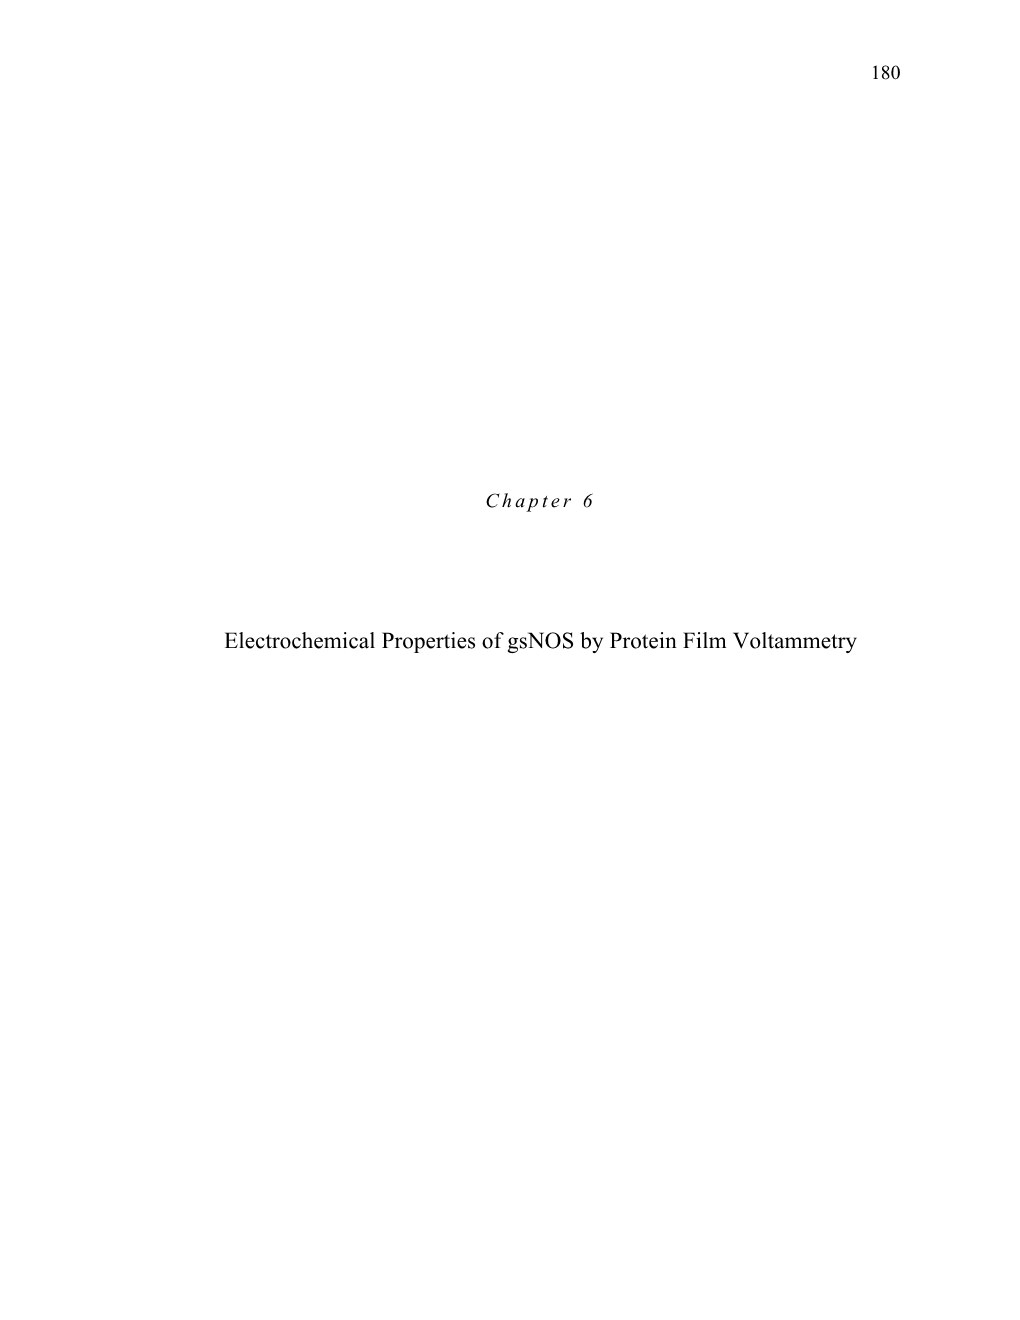 Electrochemical Properties of Gsnos by Protein Film Voltammetry